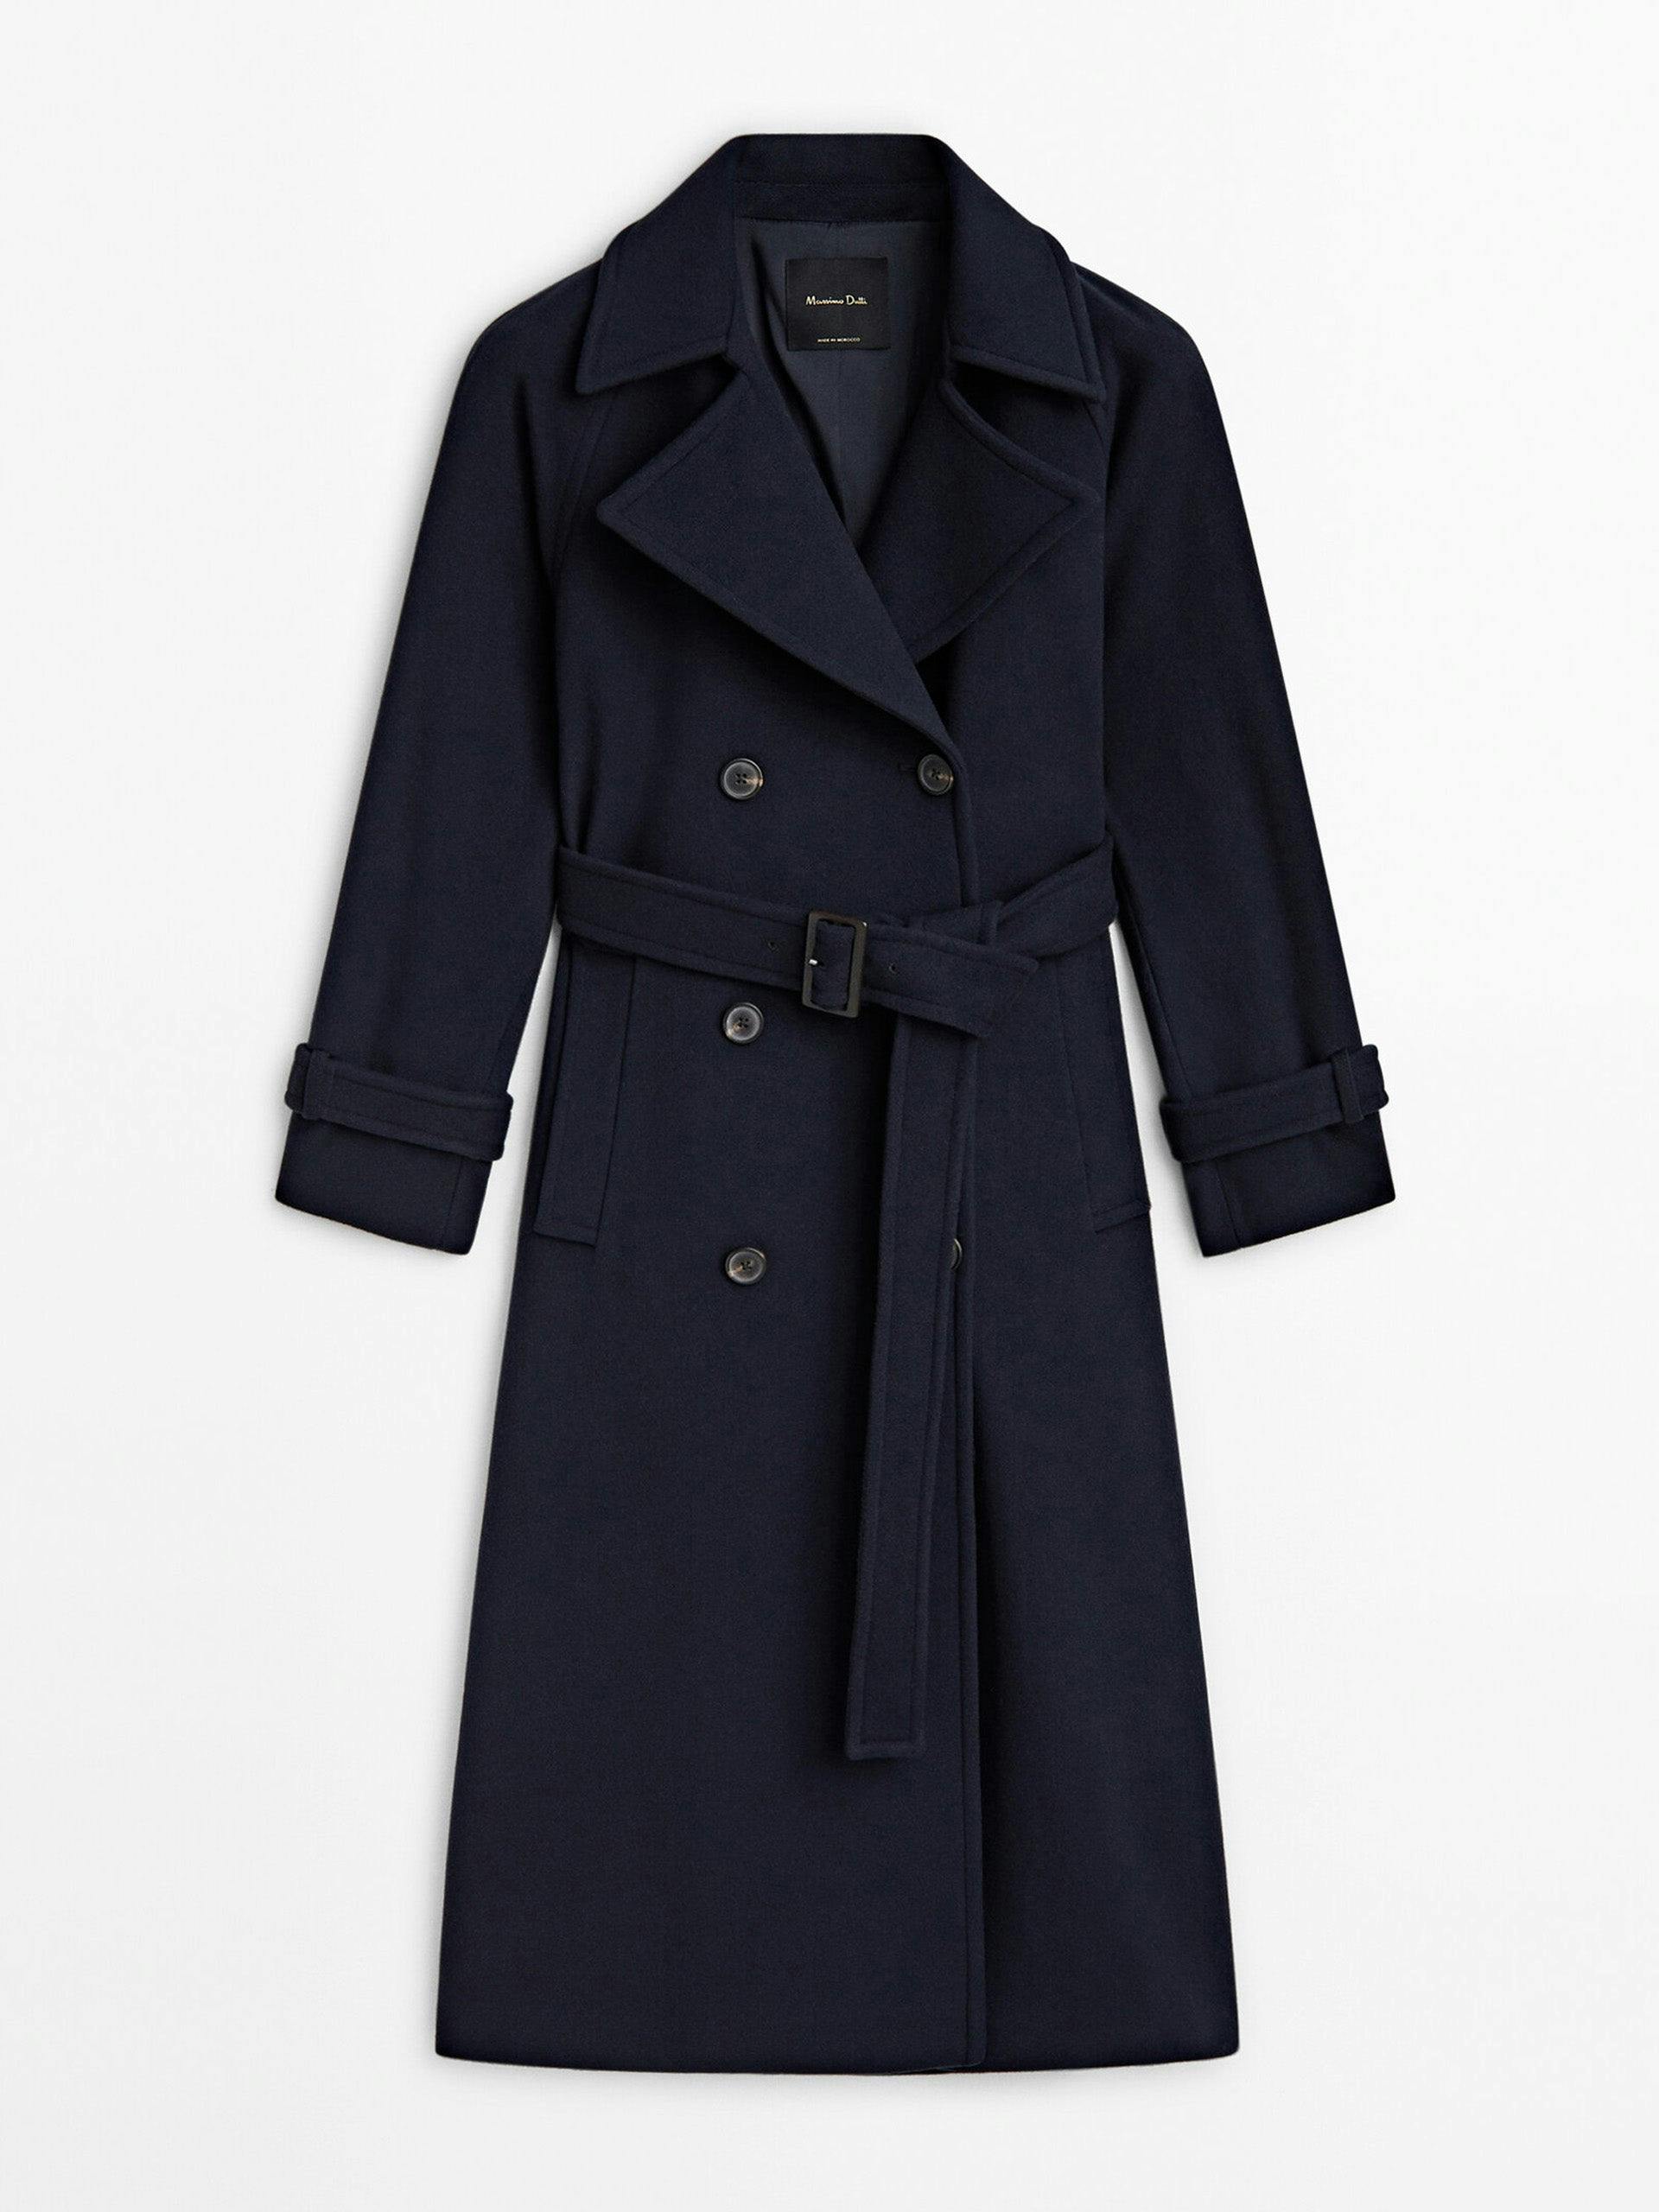 Navy blue wool blend trench coat